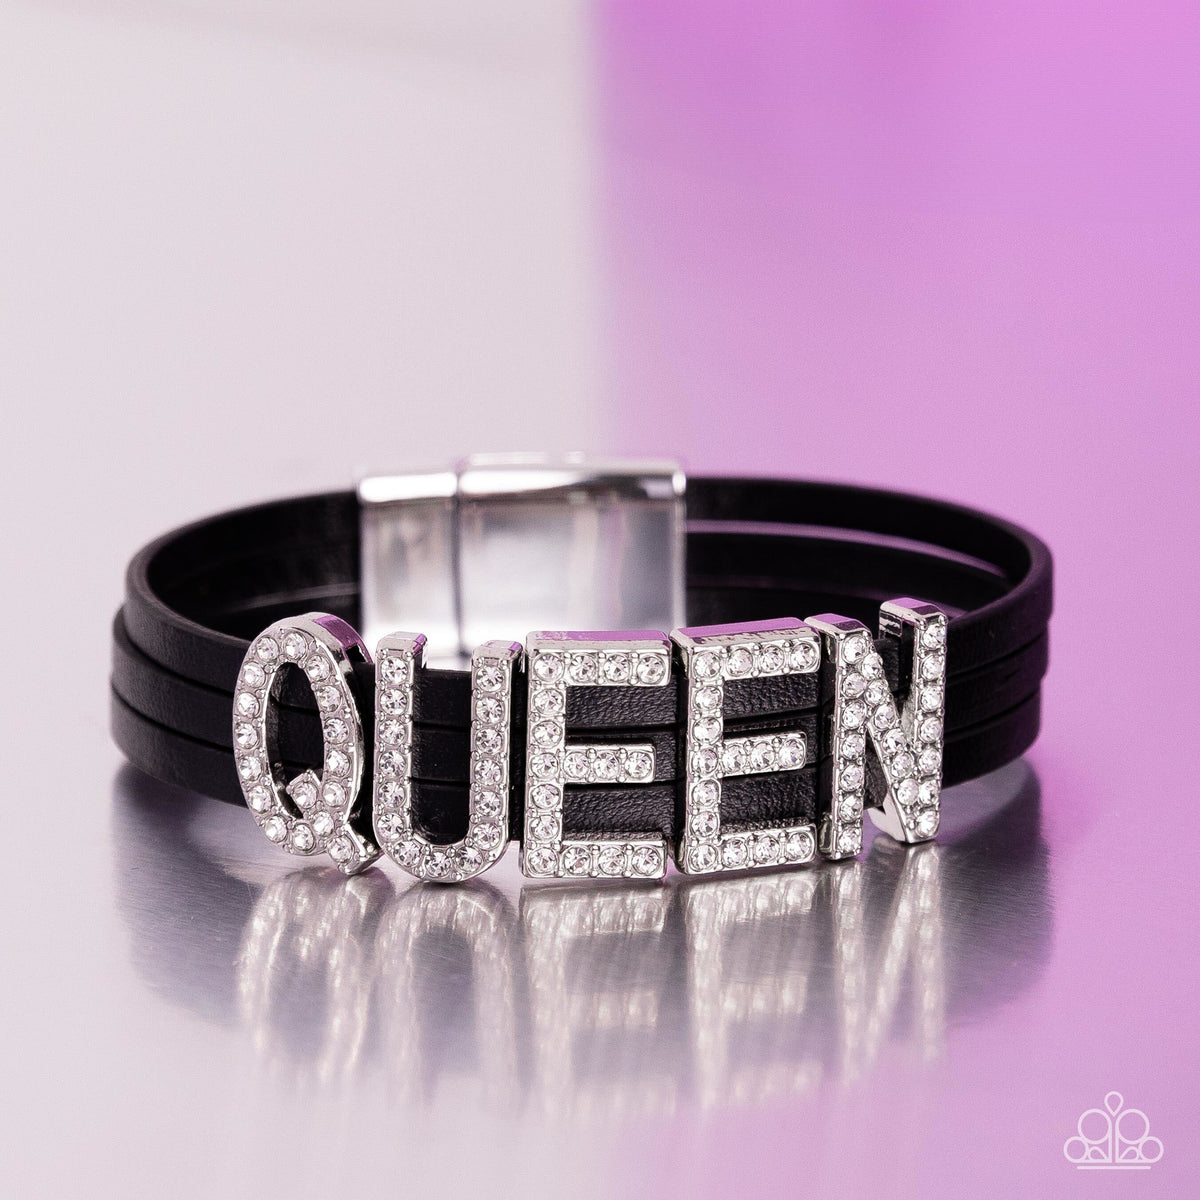 Queen of My Life Black Leather and White Rhinestone Inspirational Bracelet - Paparazzi Accessories